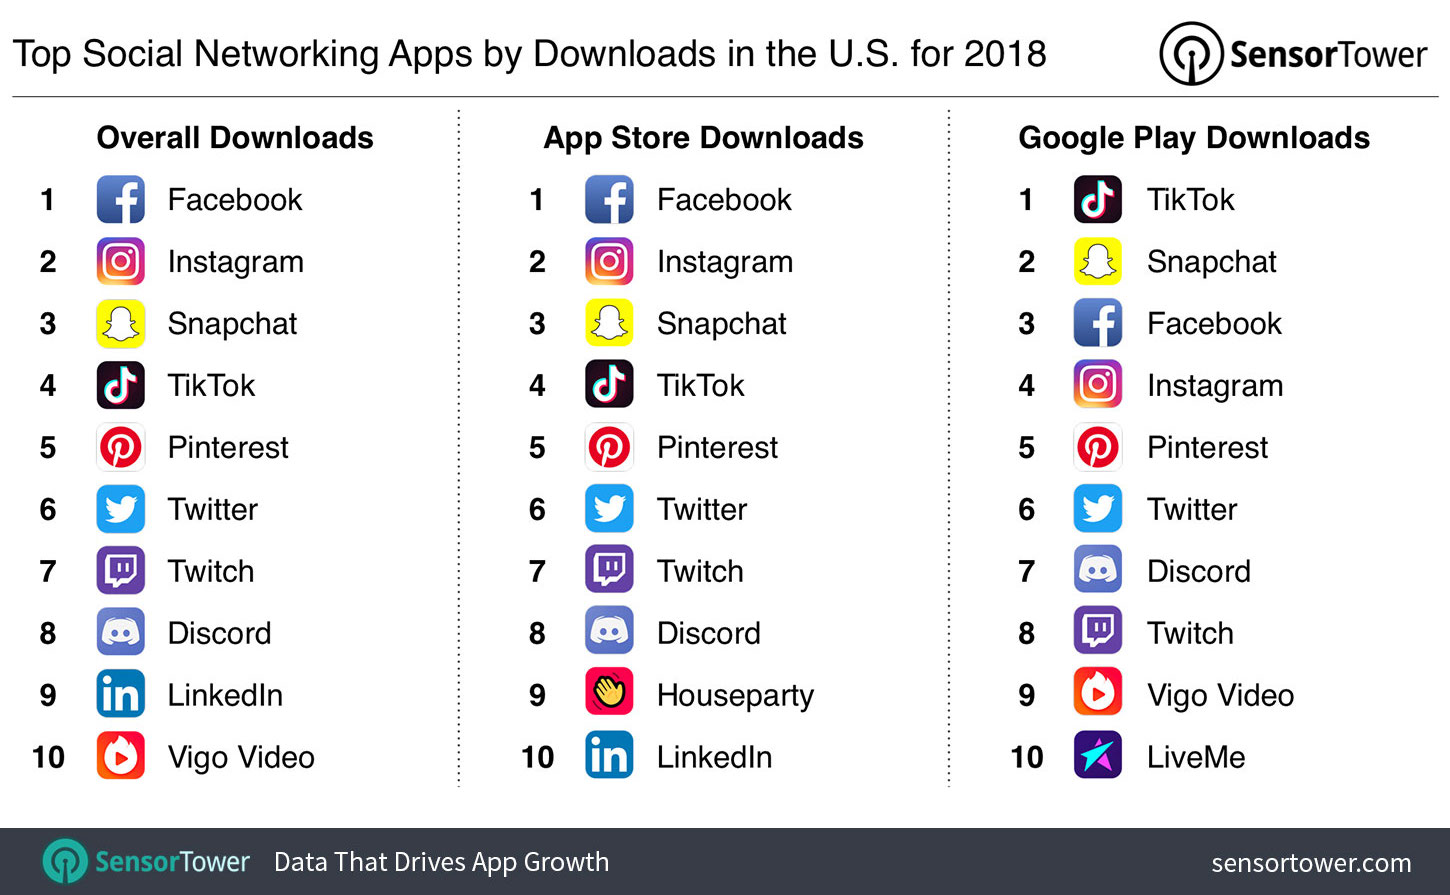 Top Social Networking Apps in the U.S. for 2018